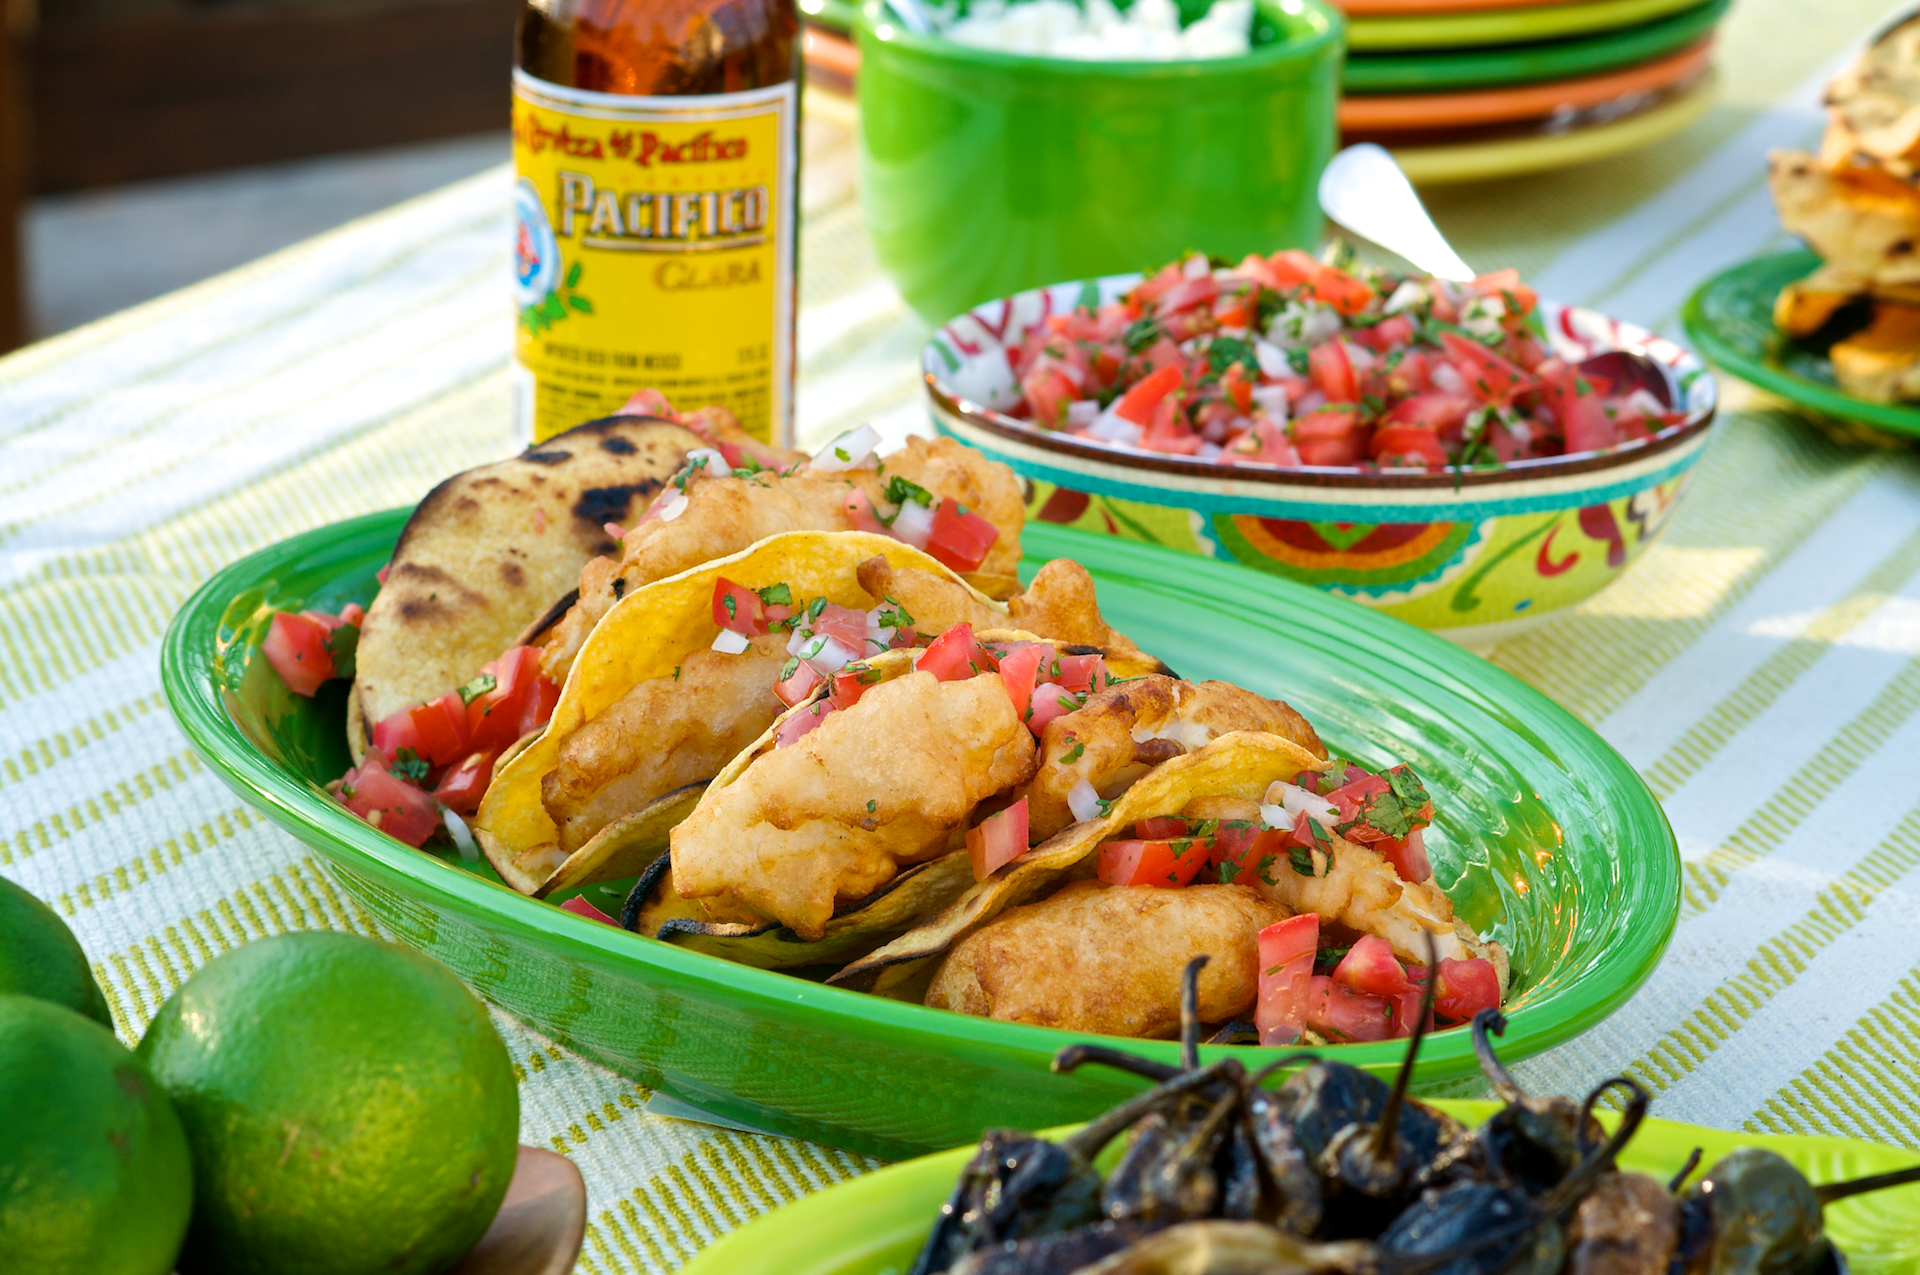 Fish tacos are one thing, but when you beer batter and fry the tacos, the flavor is next-level! The fish taco craze has spread from Mexico to California, and across the U.S. It's the perfect dish to serve!